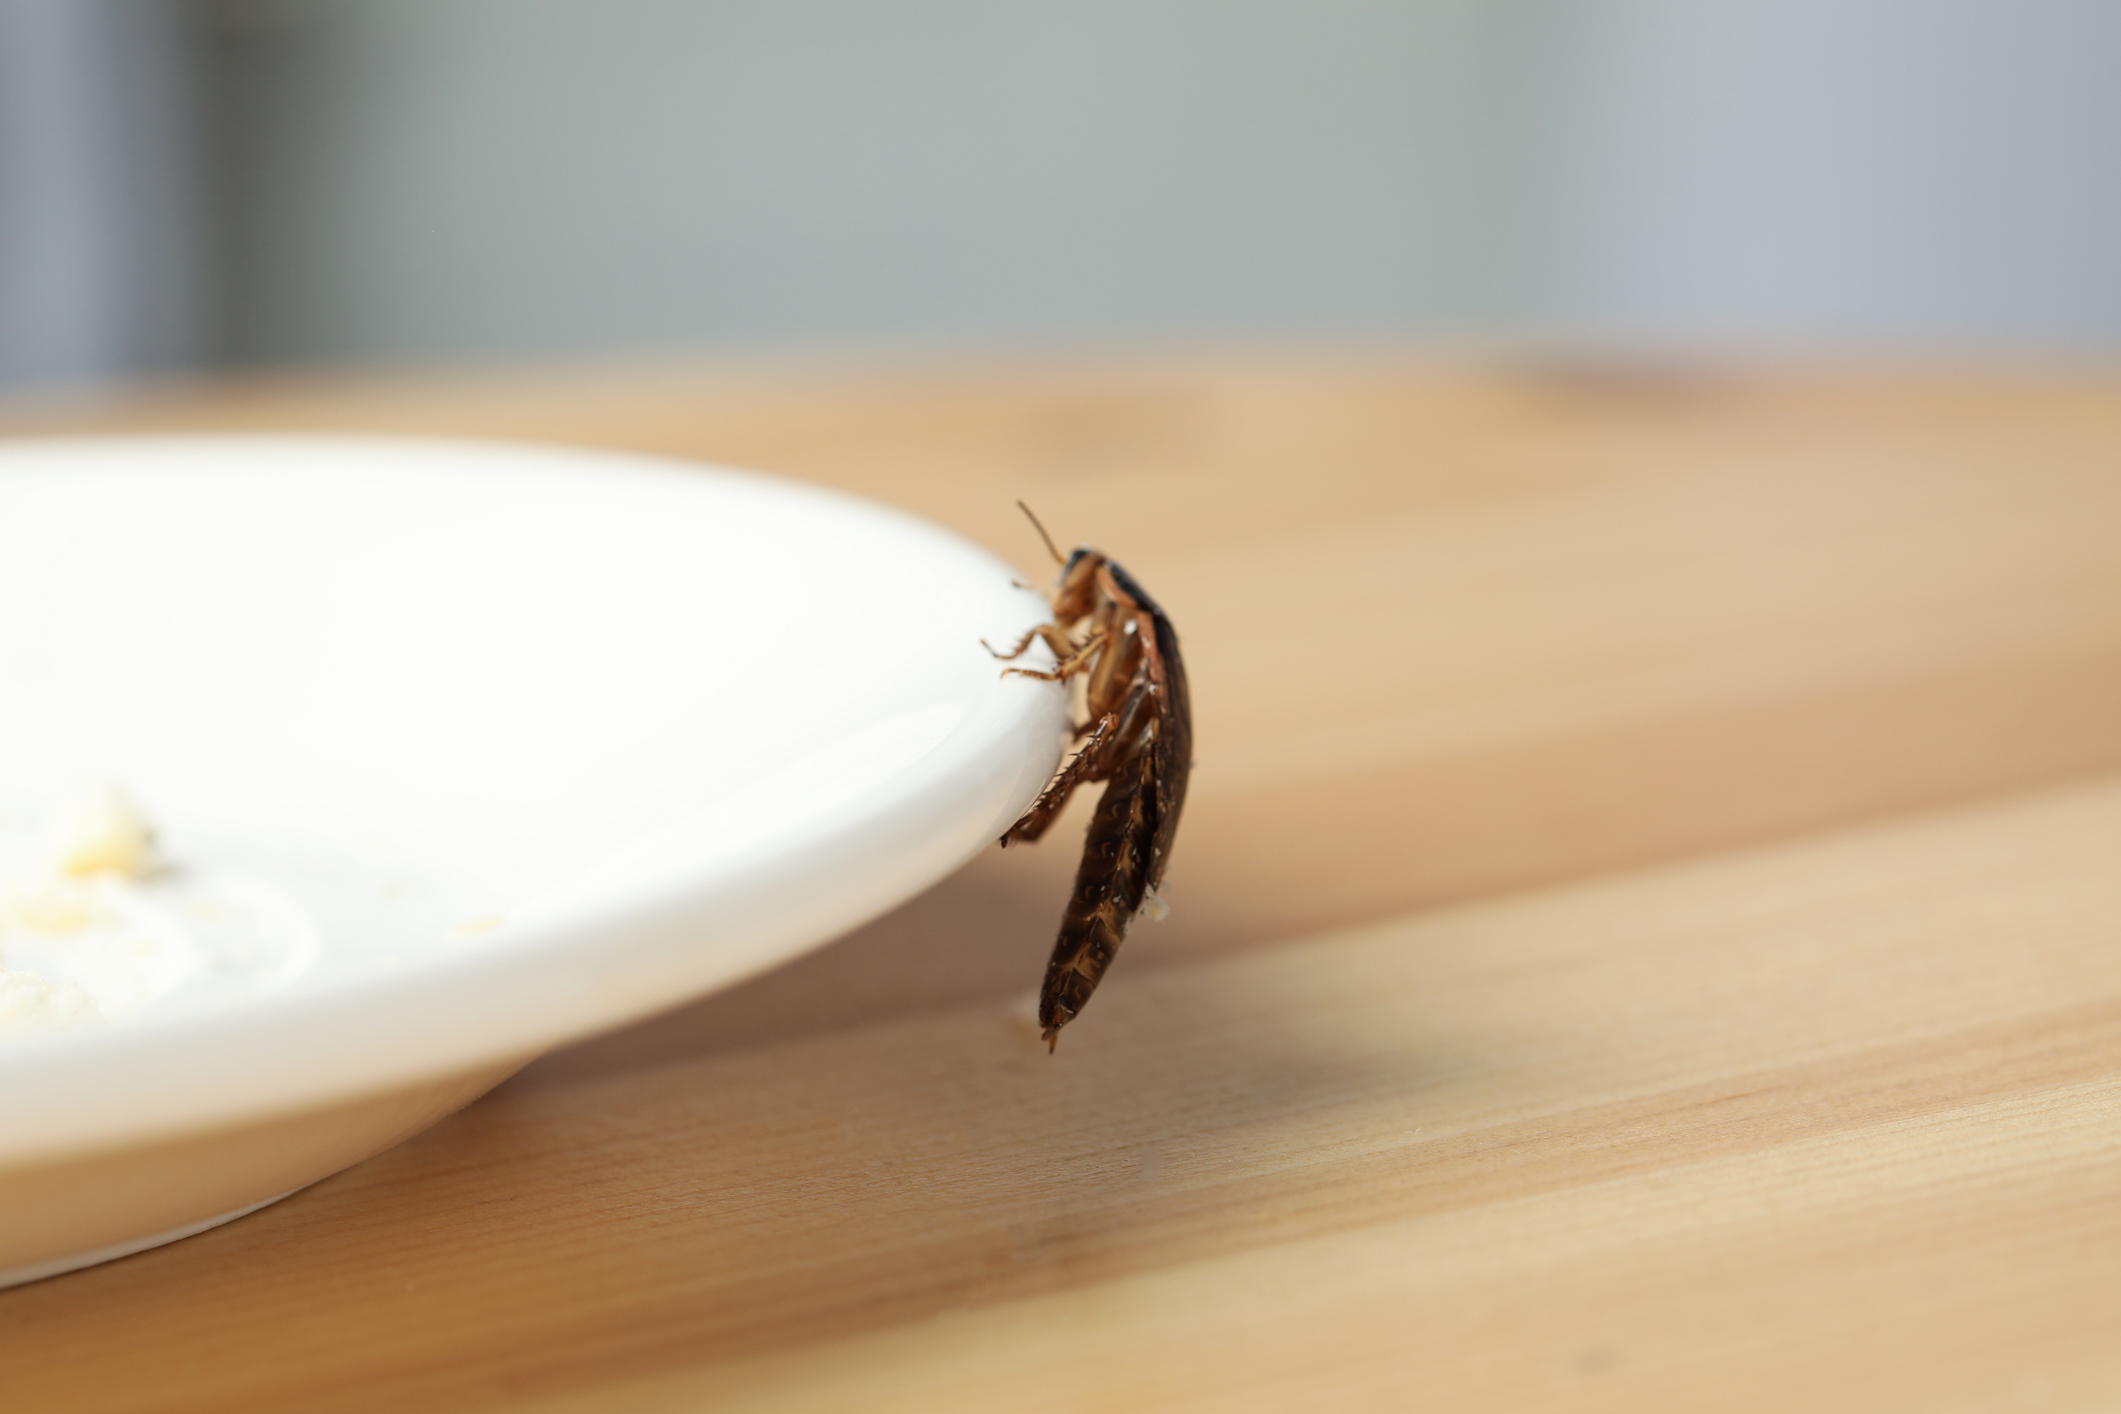 Roach climbing white plate on dinner table